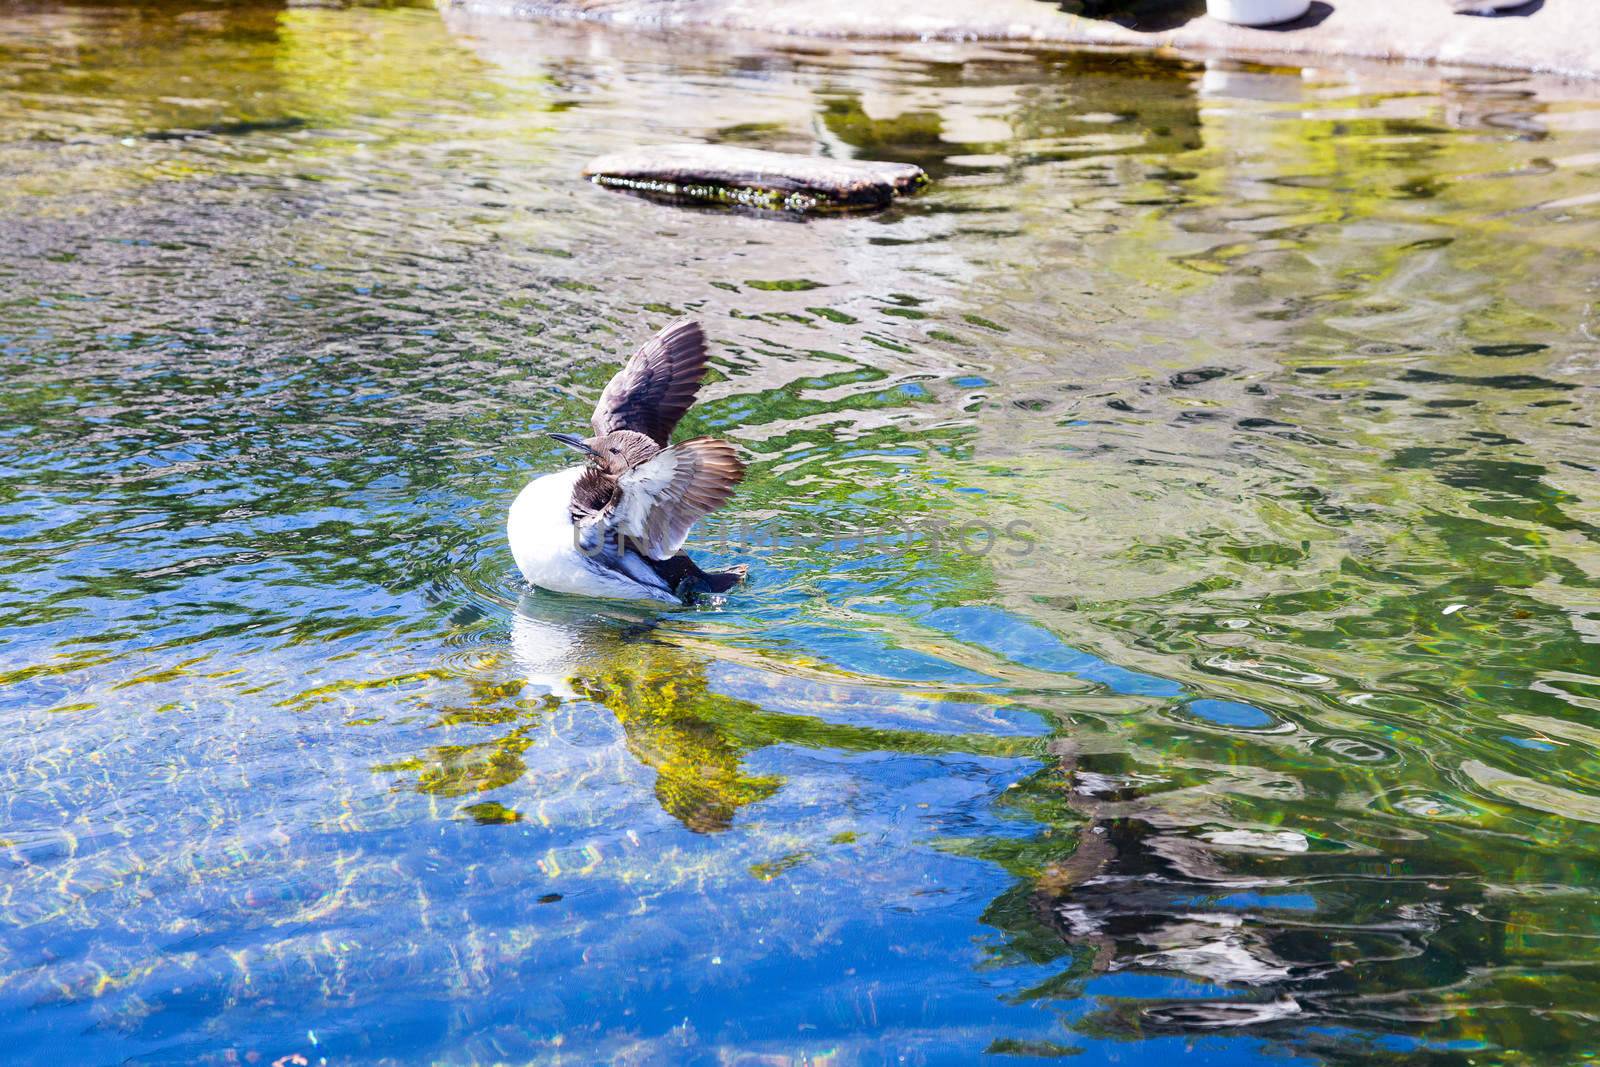 Birds swim and clean themselves at a zoo aquarium tank for waterfowl birds.